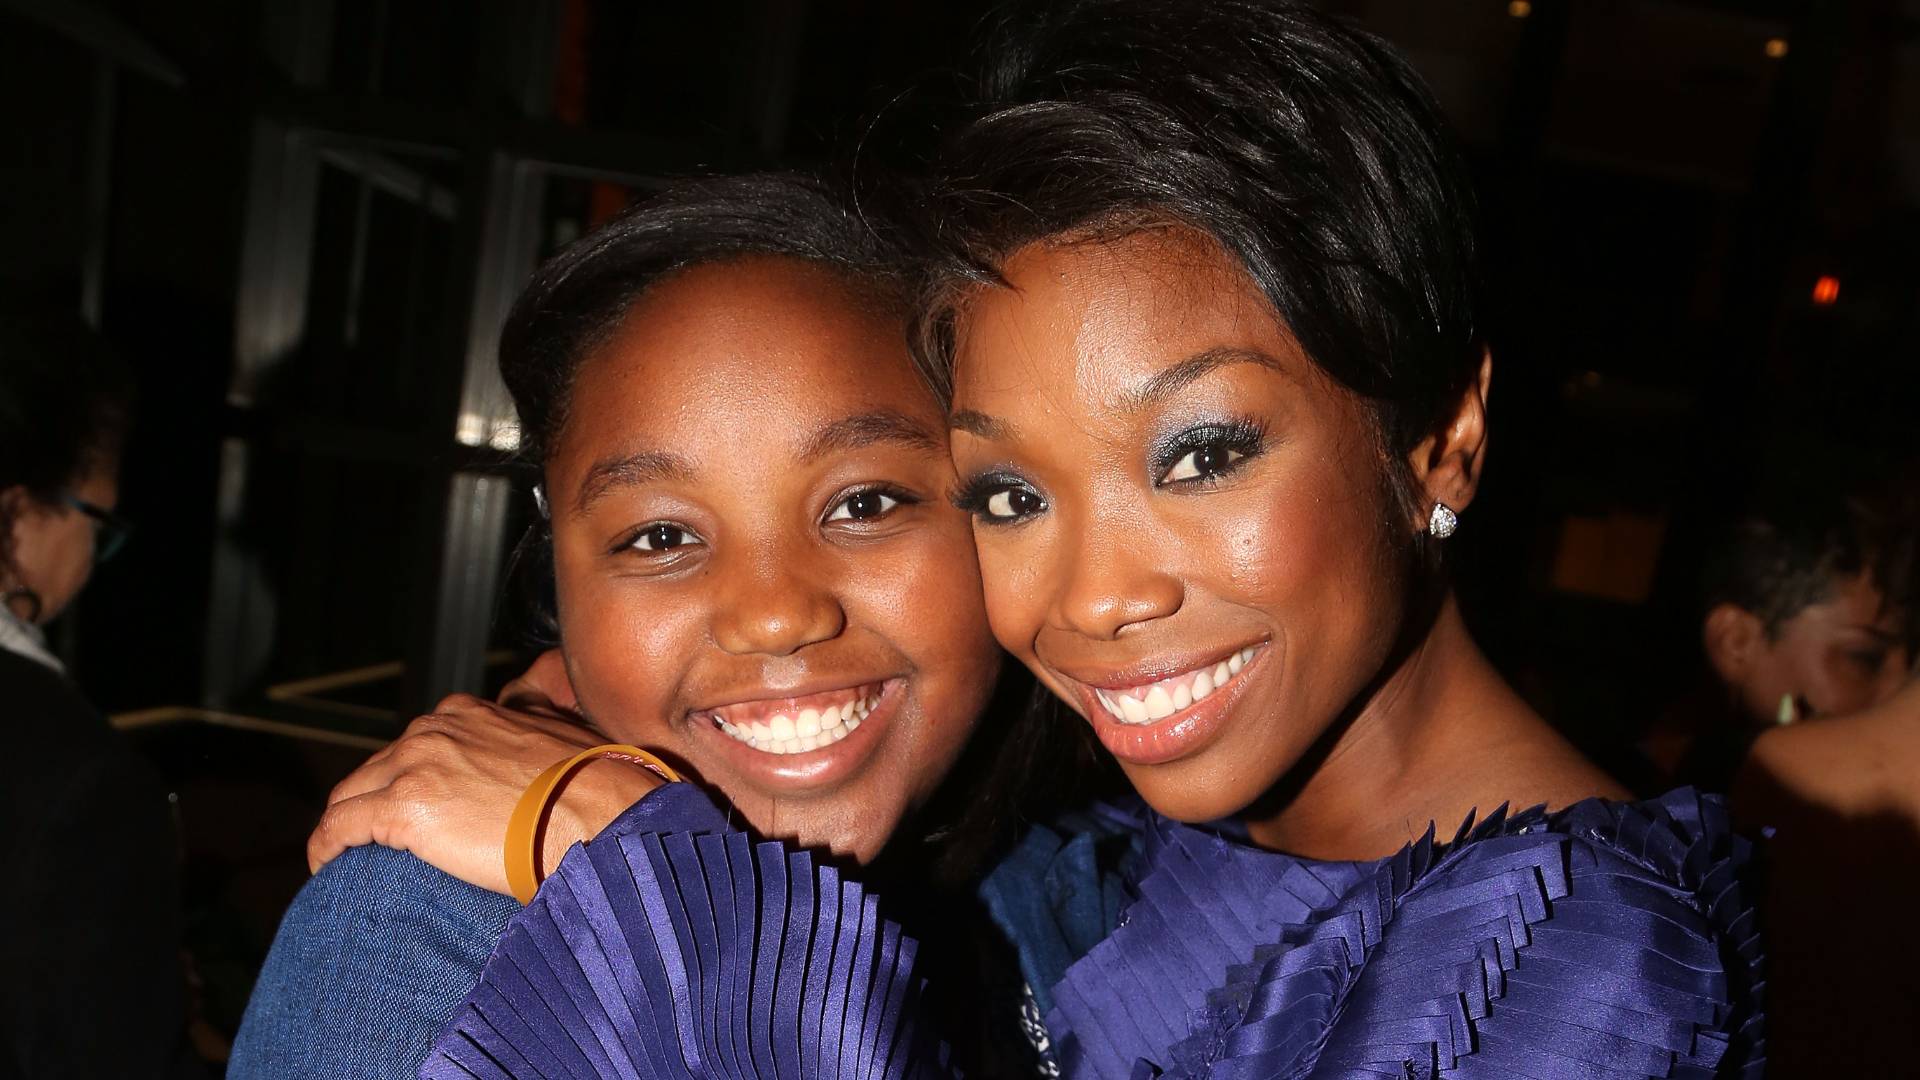 Sy'rai Iman Smith and mother Brandy Norwood pose at the Opening Night After Party for Brandy's debut in "Chicago" on Broadway at David Burke fabrick on April 30, 2015 in New York City. 
